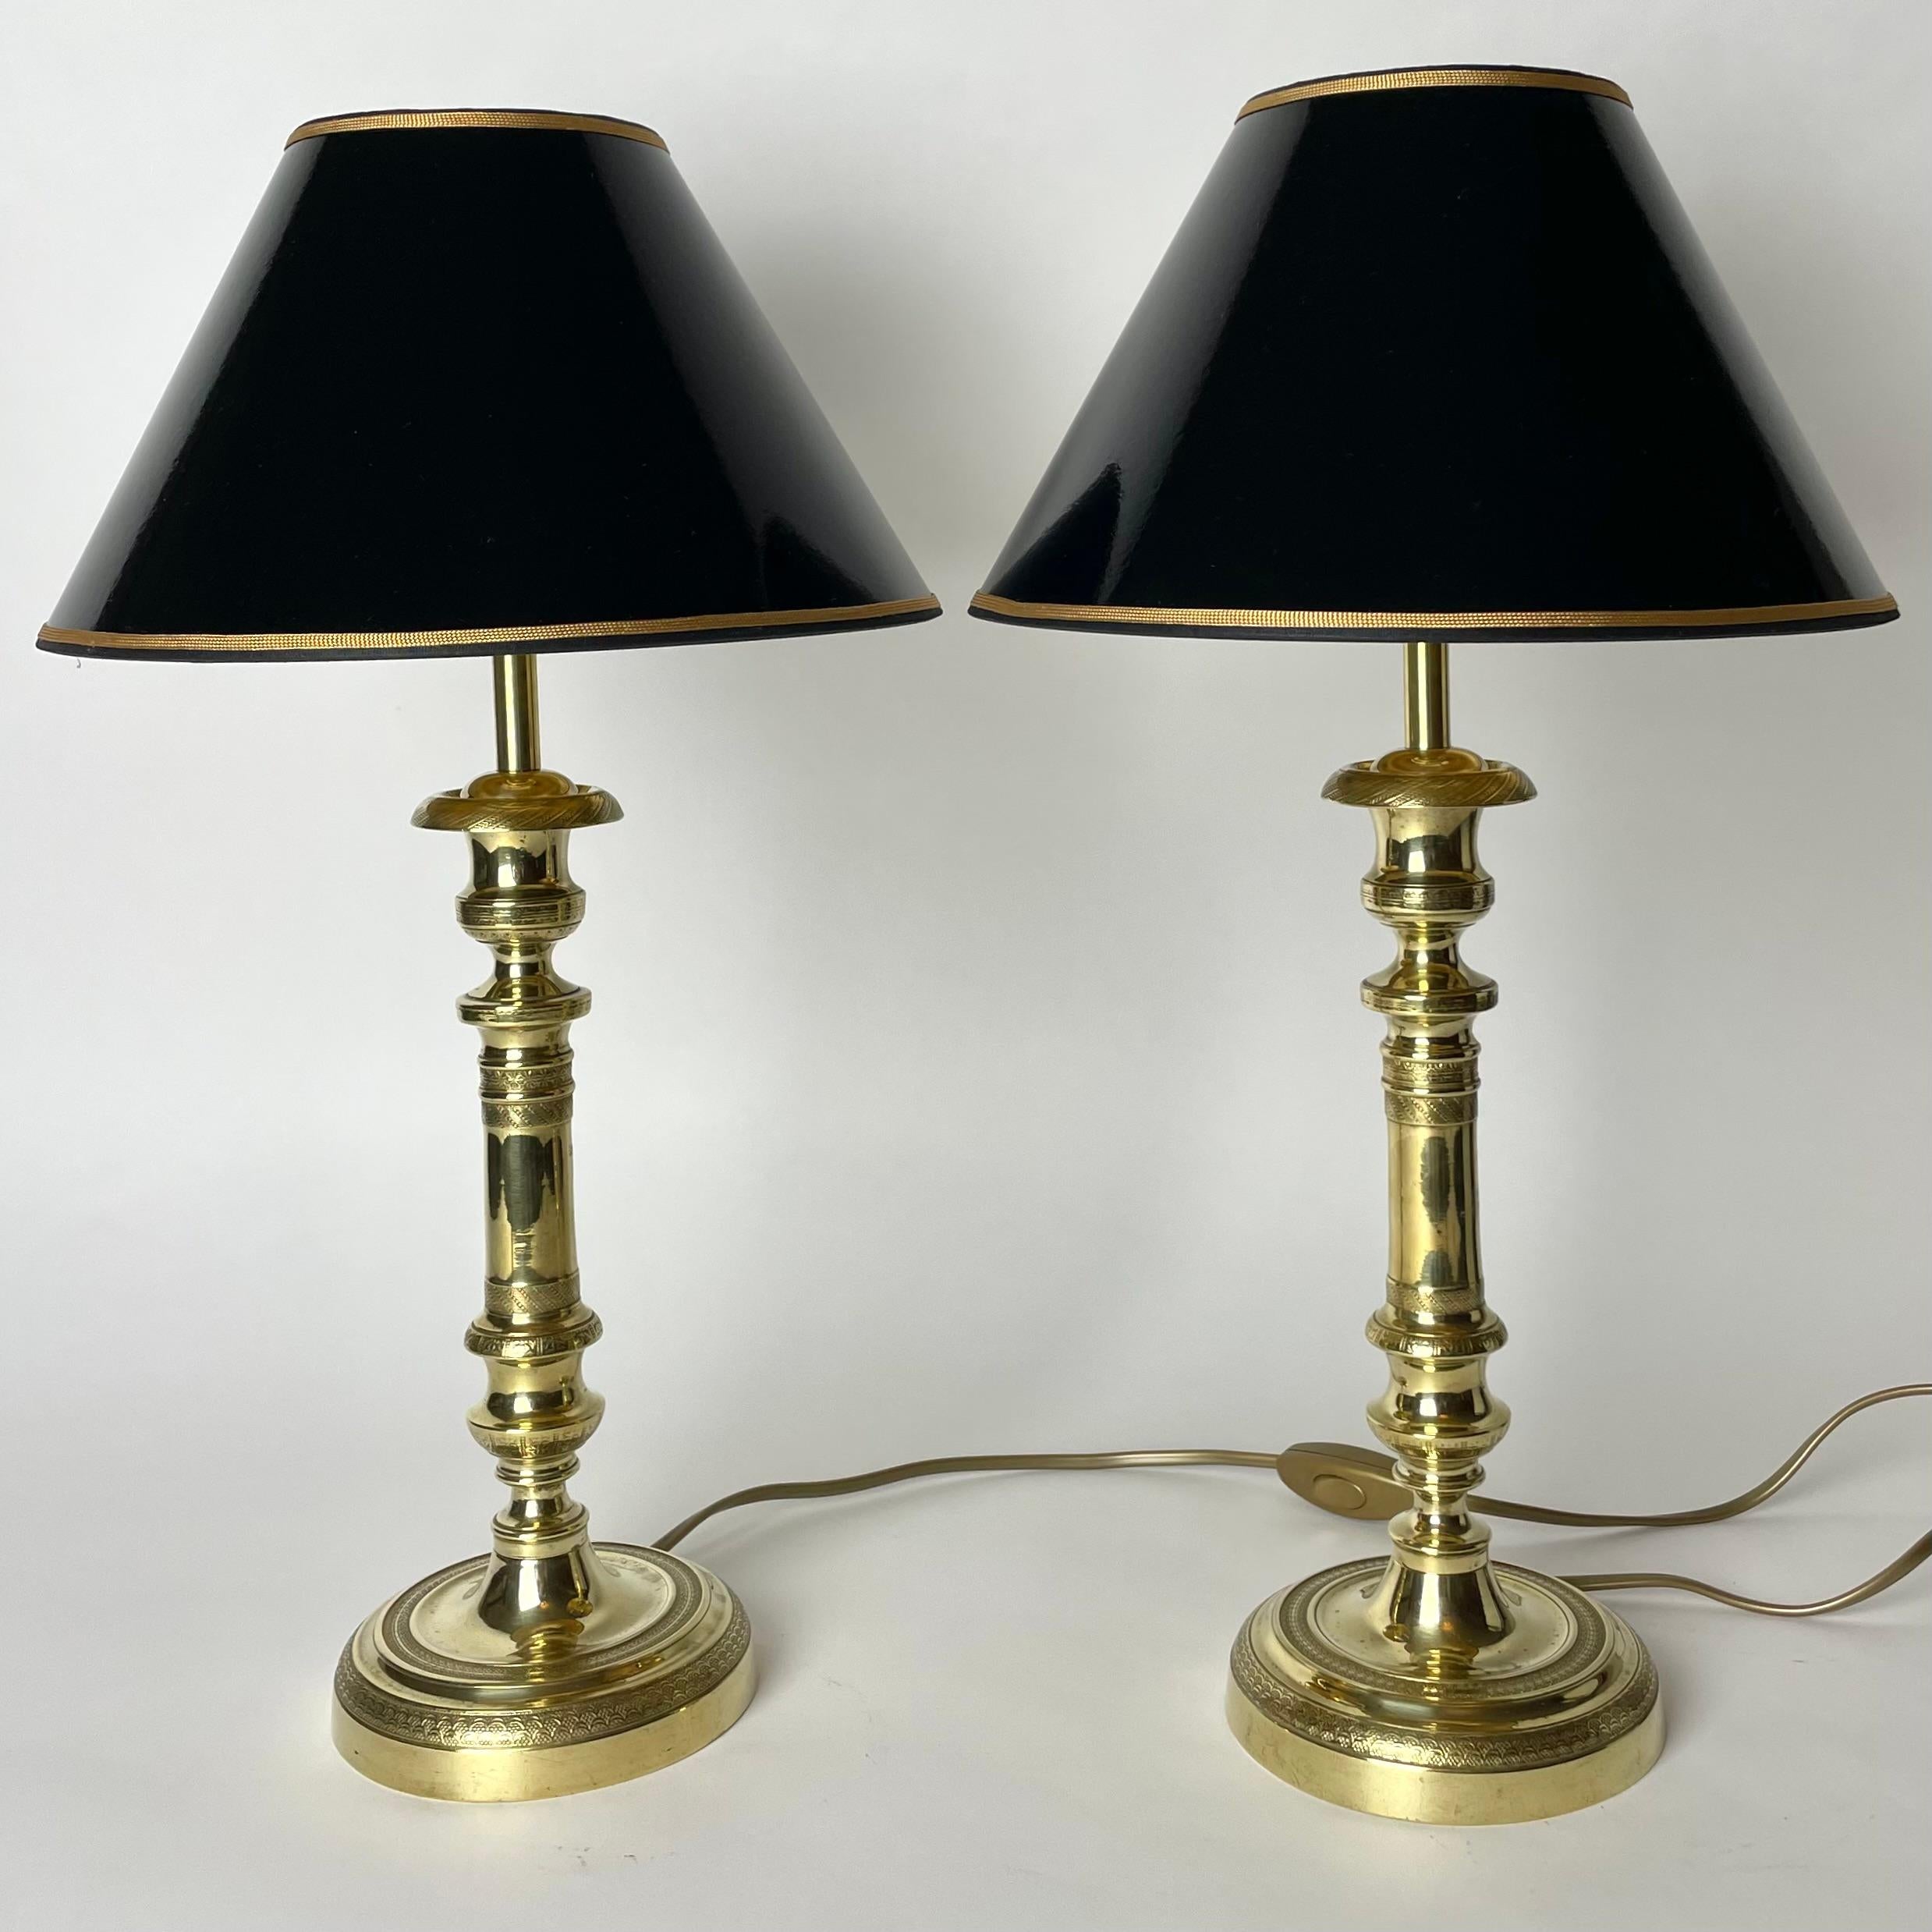 Elegant pair of Empire Table Lamps, originally candlesticks from the 1820s In Good Condition For Sale In Knivsta, SE